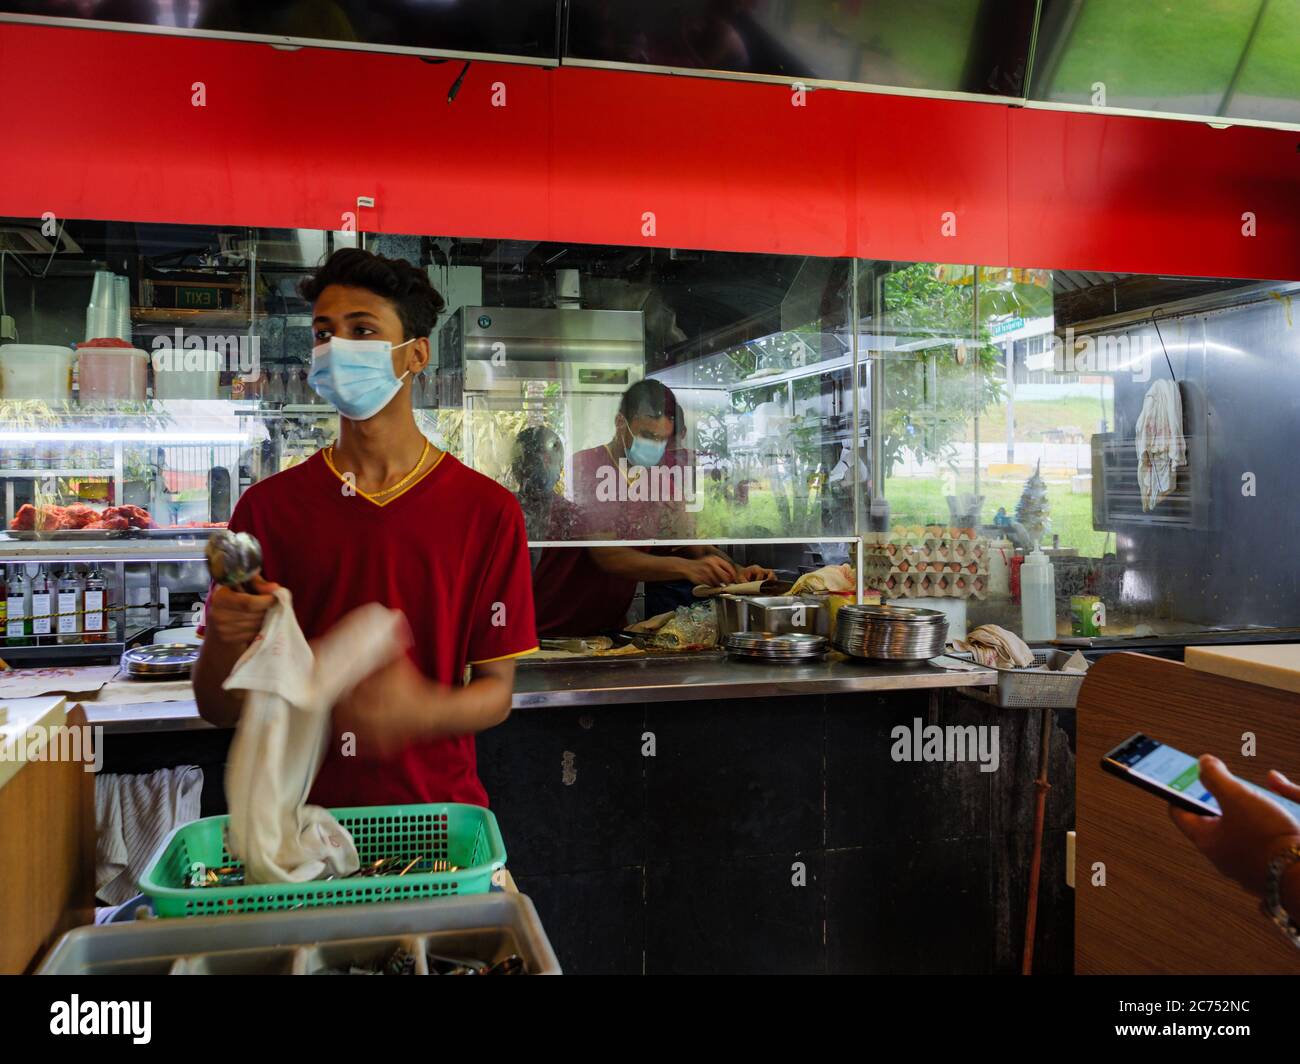 SINGAPORE – JULY 10 2020 – Employees at the Springleaf Prata Place Indian restaurant in Singapore wear protective masks as they clean cutlery and prep Stock Photo